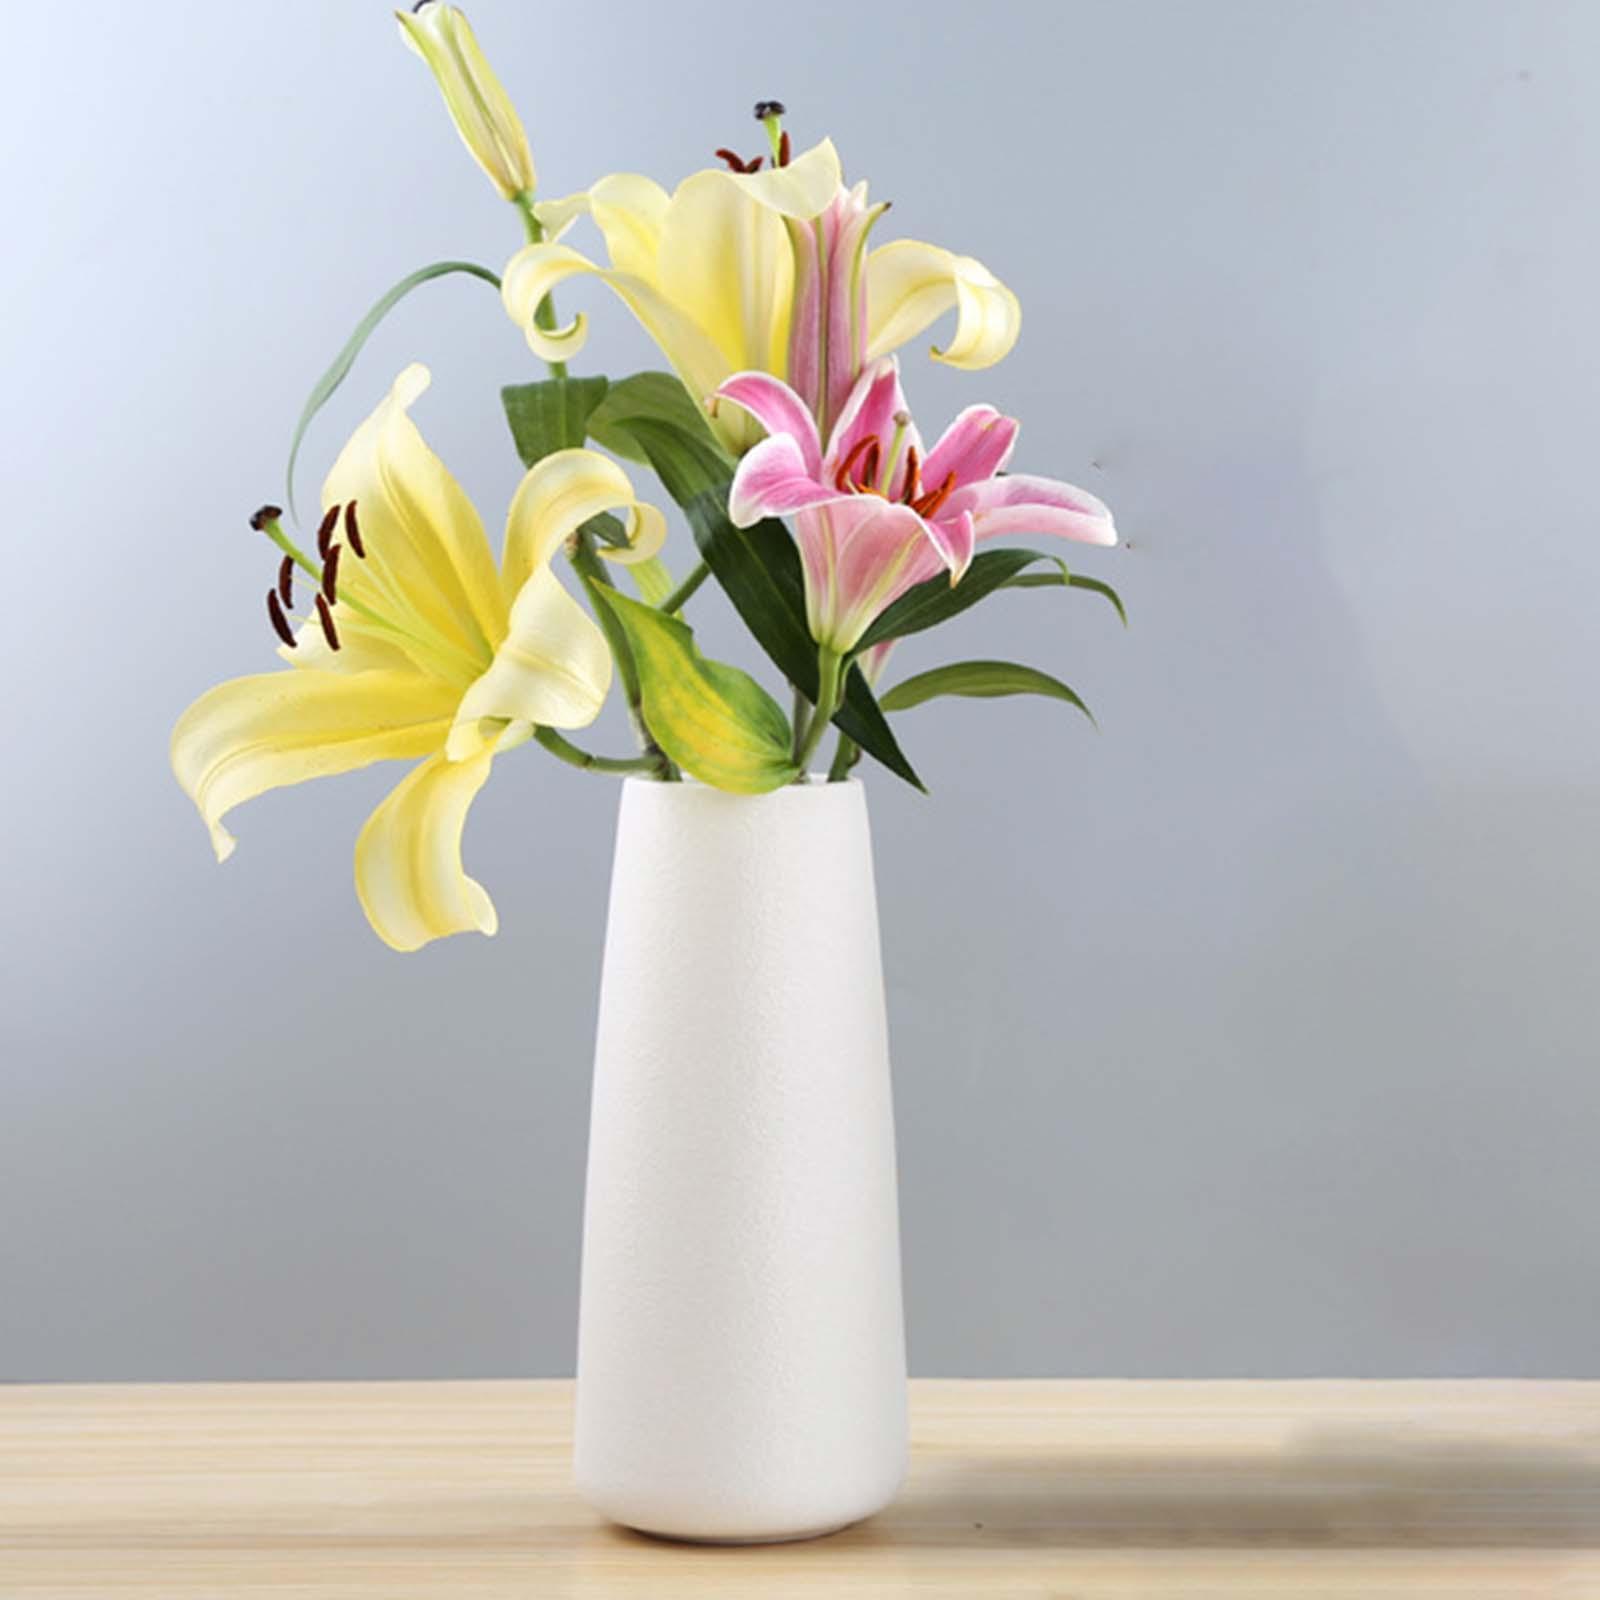 Nordic Style Decorative Vase,Dried Flower Container ,Nordic Minimalism Style Decoration for Cabinet Living Room